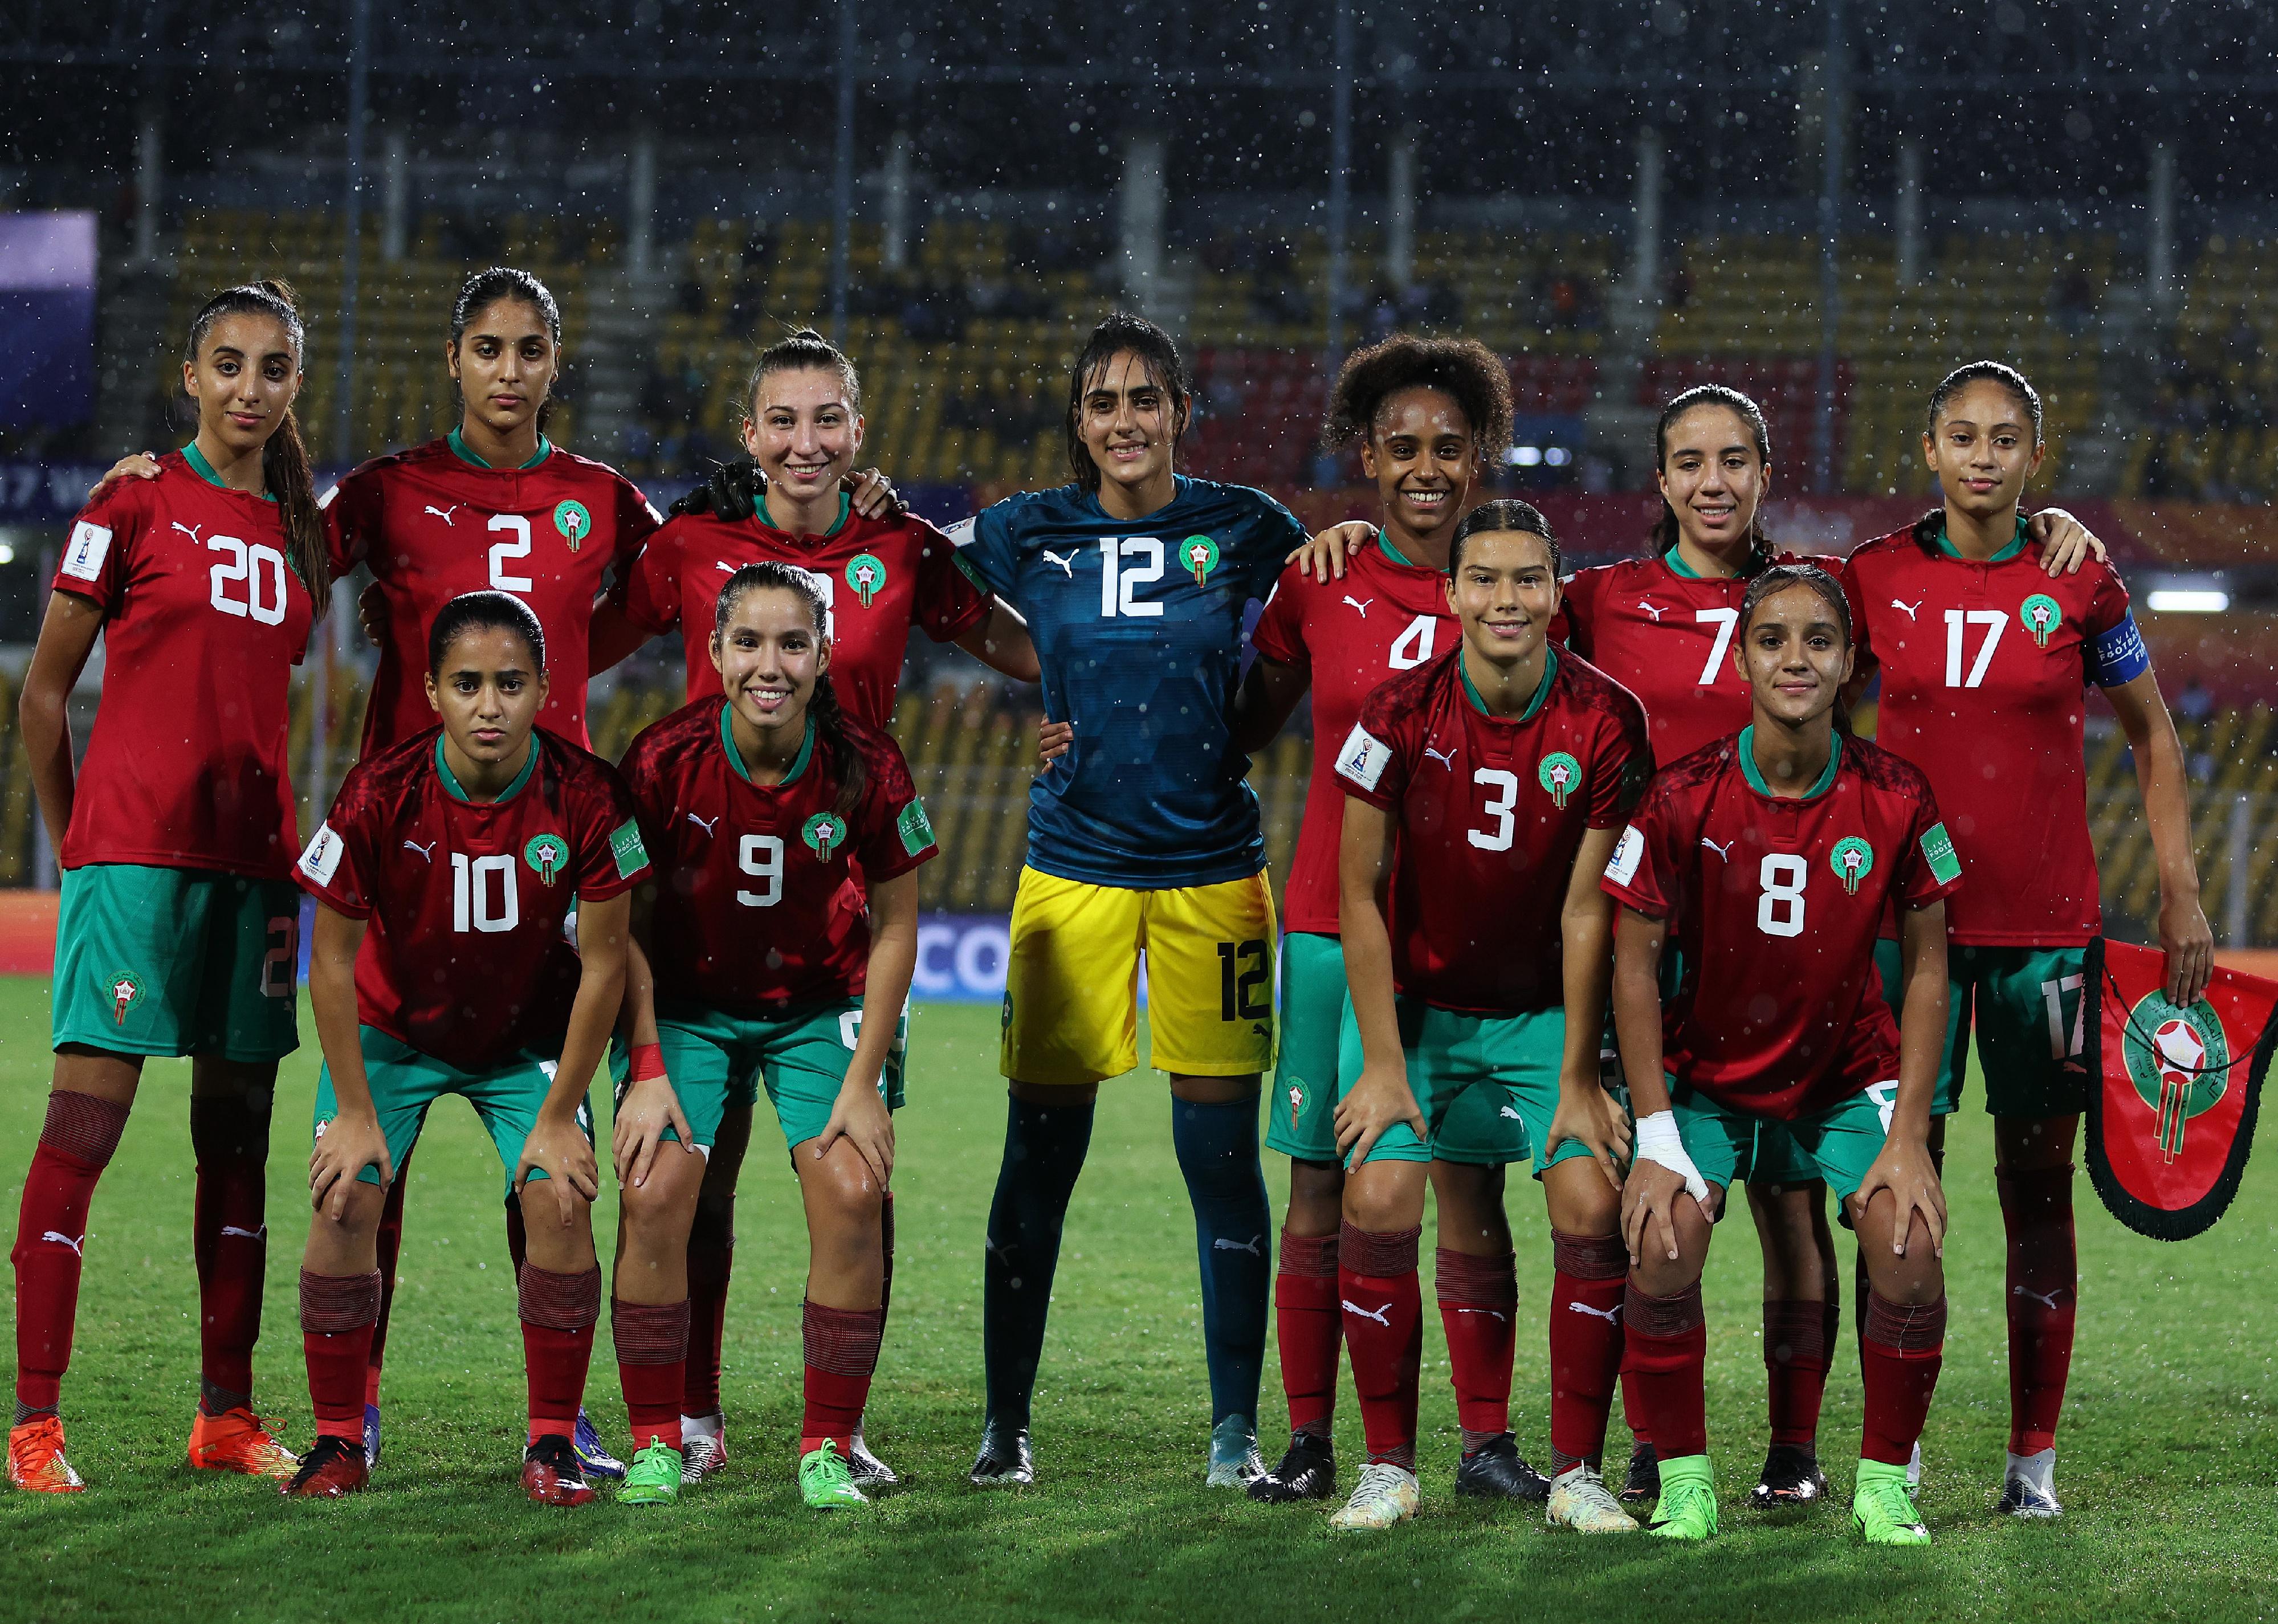 Morocco pose for a team photo ahead of the FIFA U-17 Women's World Cup 2022 Group A match.